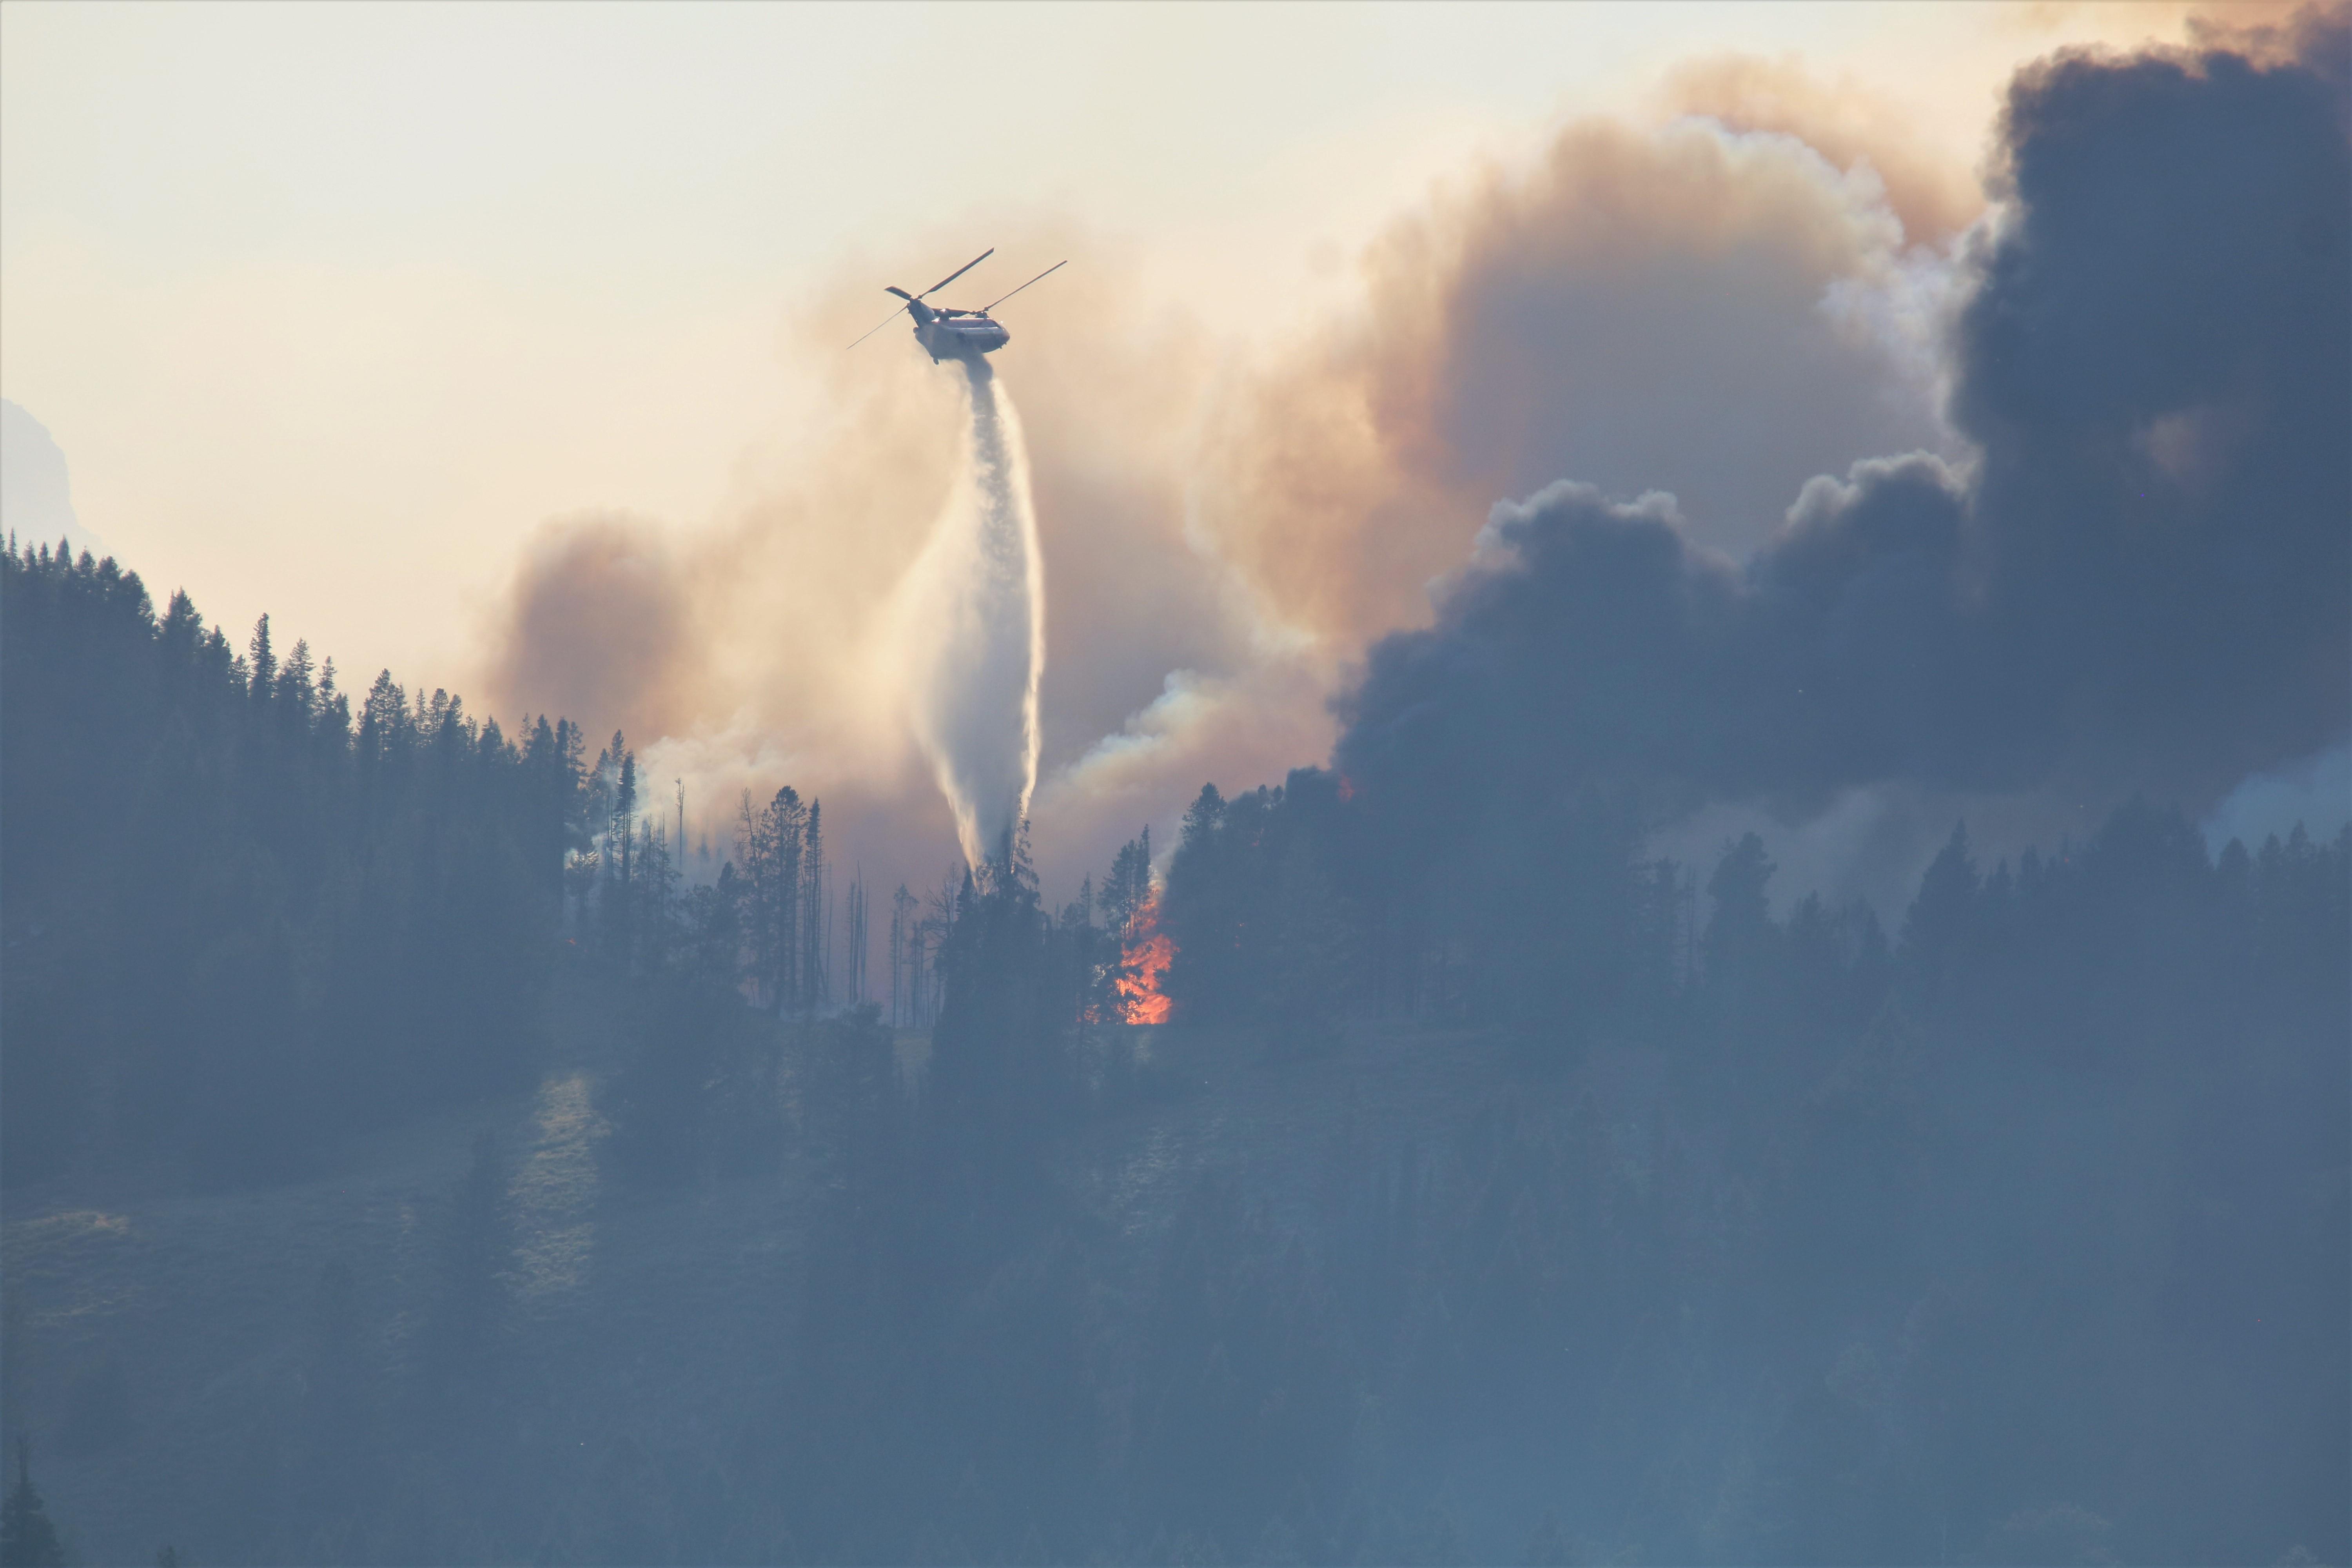 A helicopter drops water on flames in the trees.